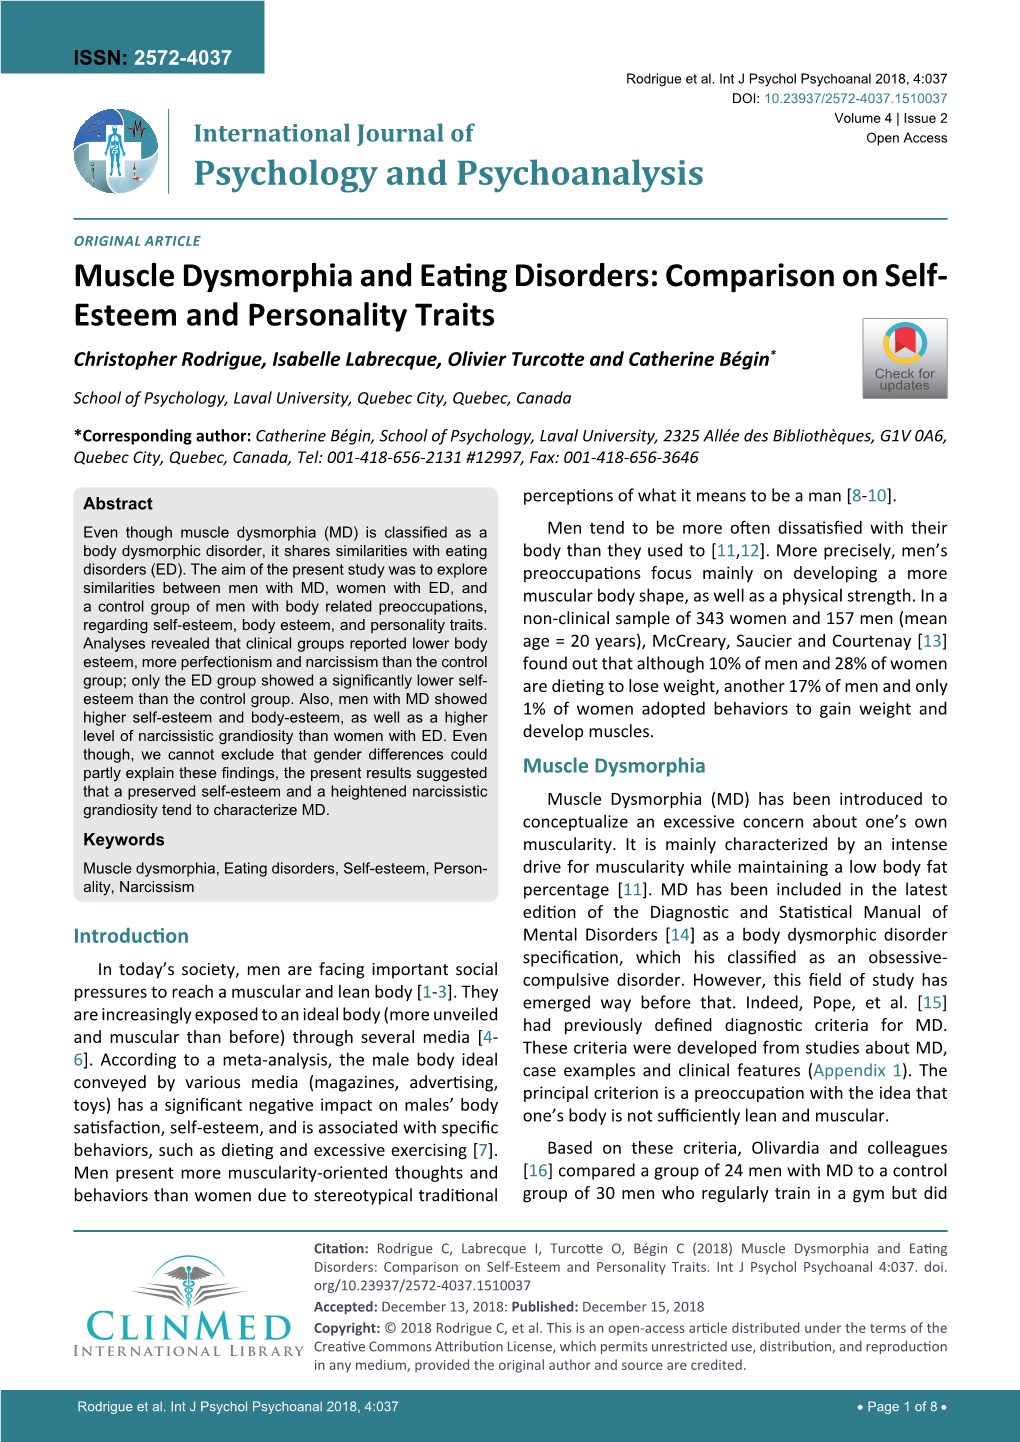 Muscle Dysmorphia and Eating Disorders: Comparison on Self-Esteem and Personality Traits